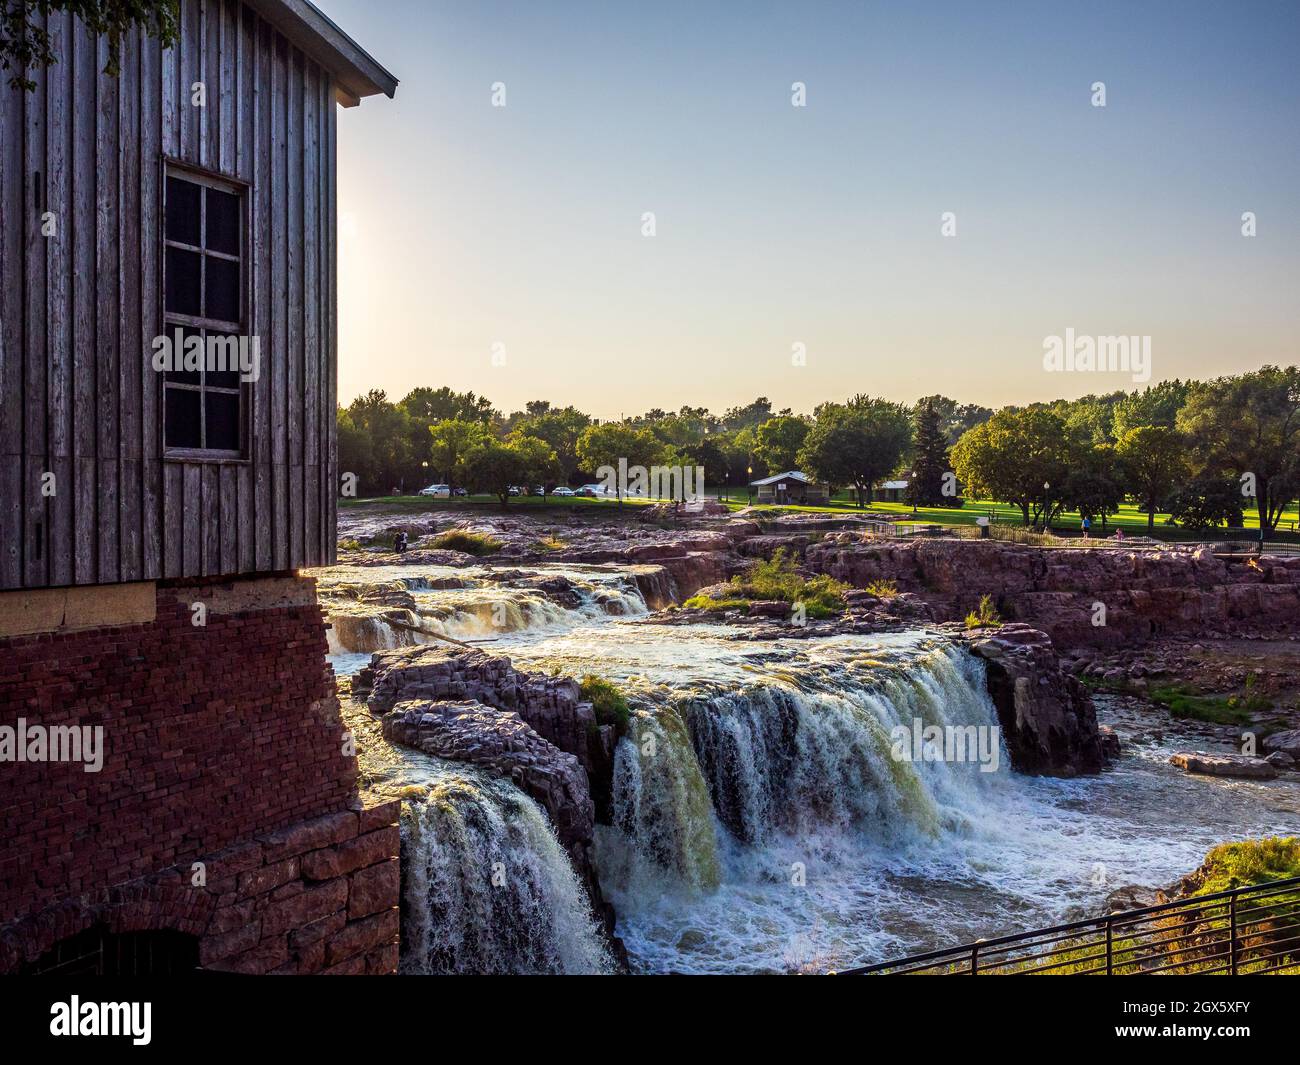 The falls that give their name to the city - Sioux Falls, South Dakota. Stock Photo